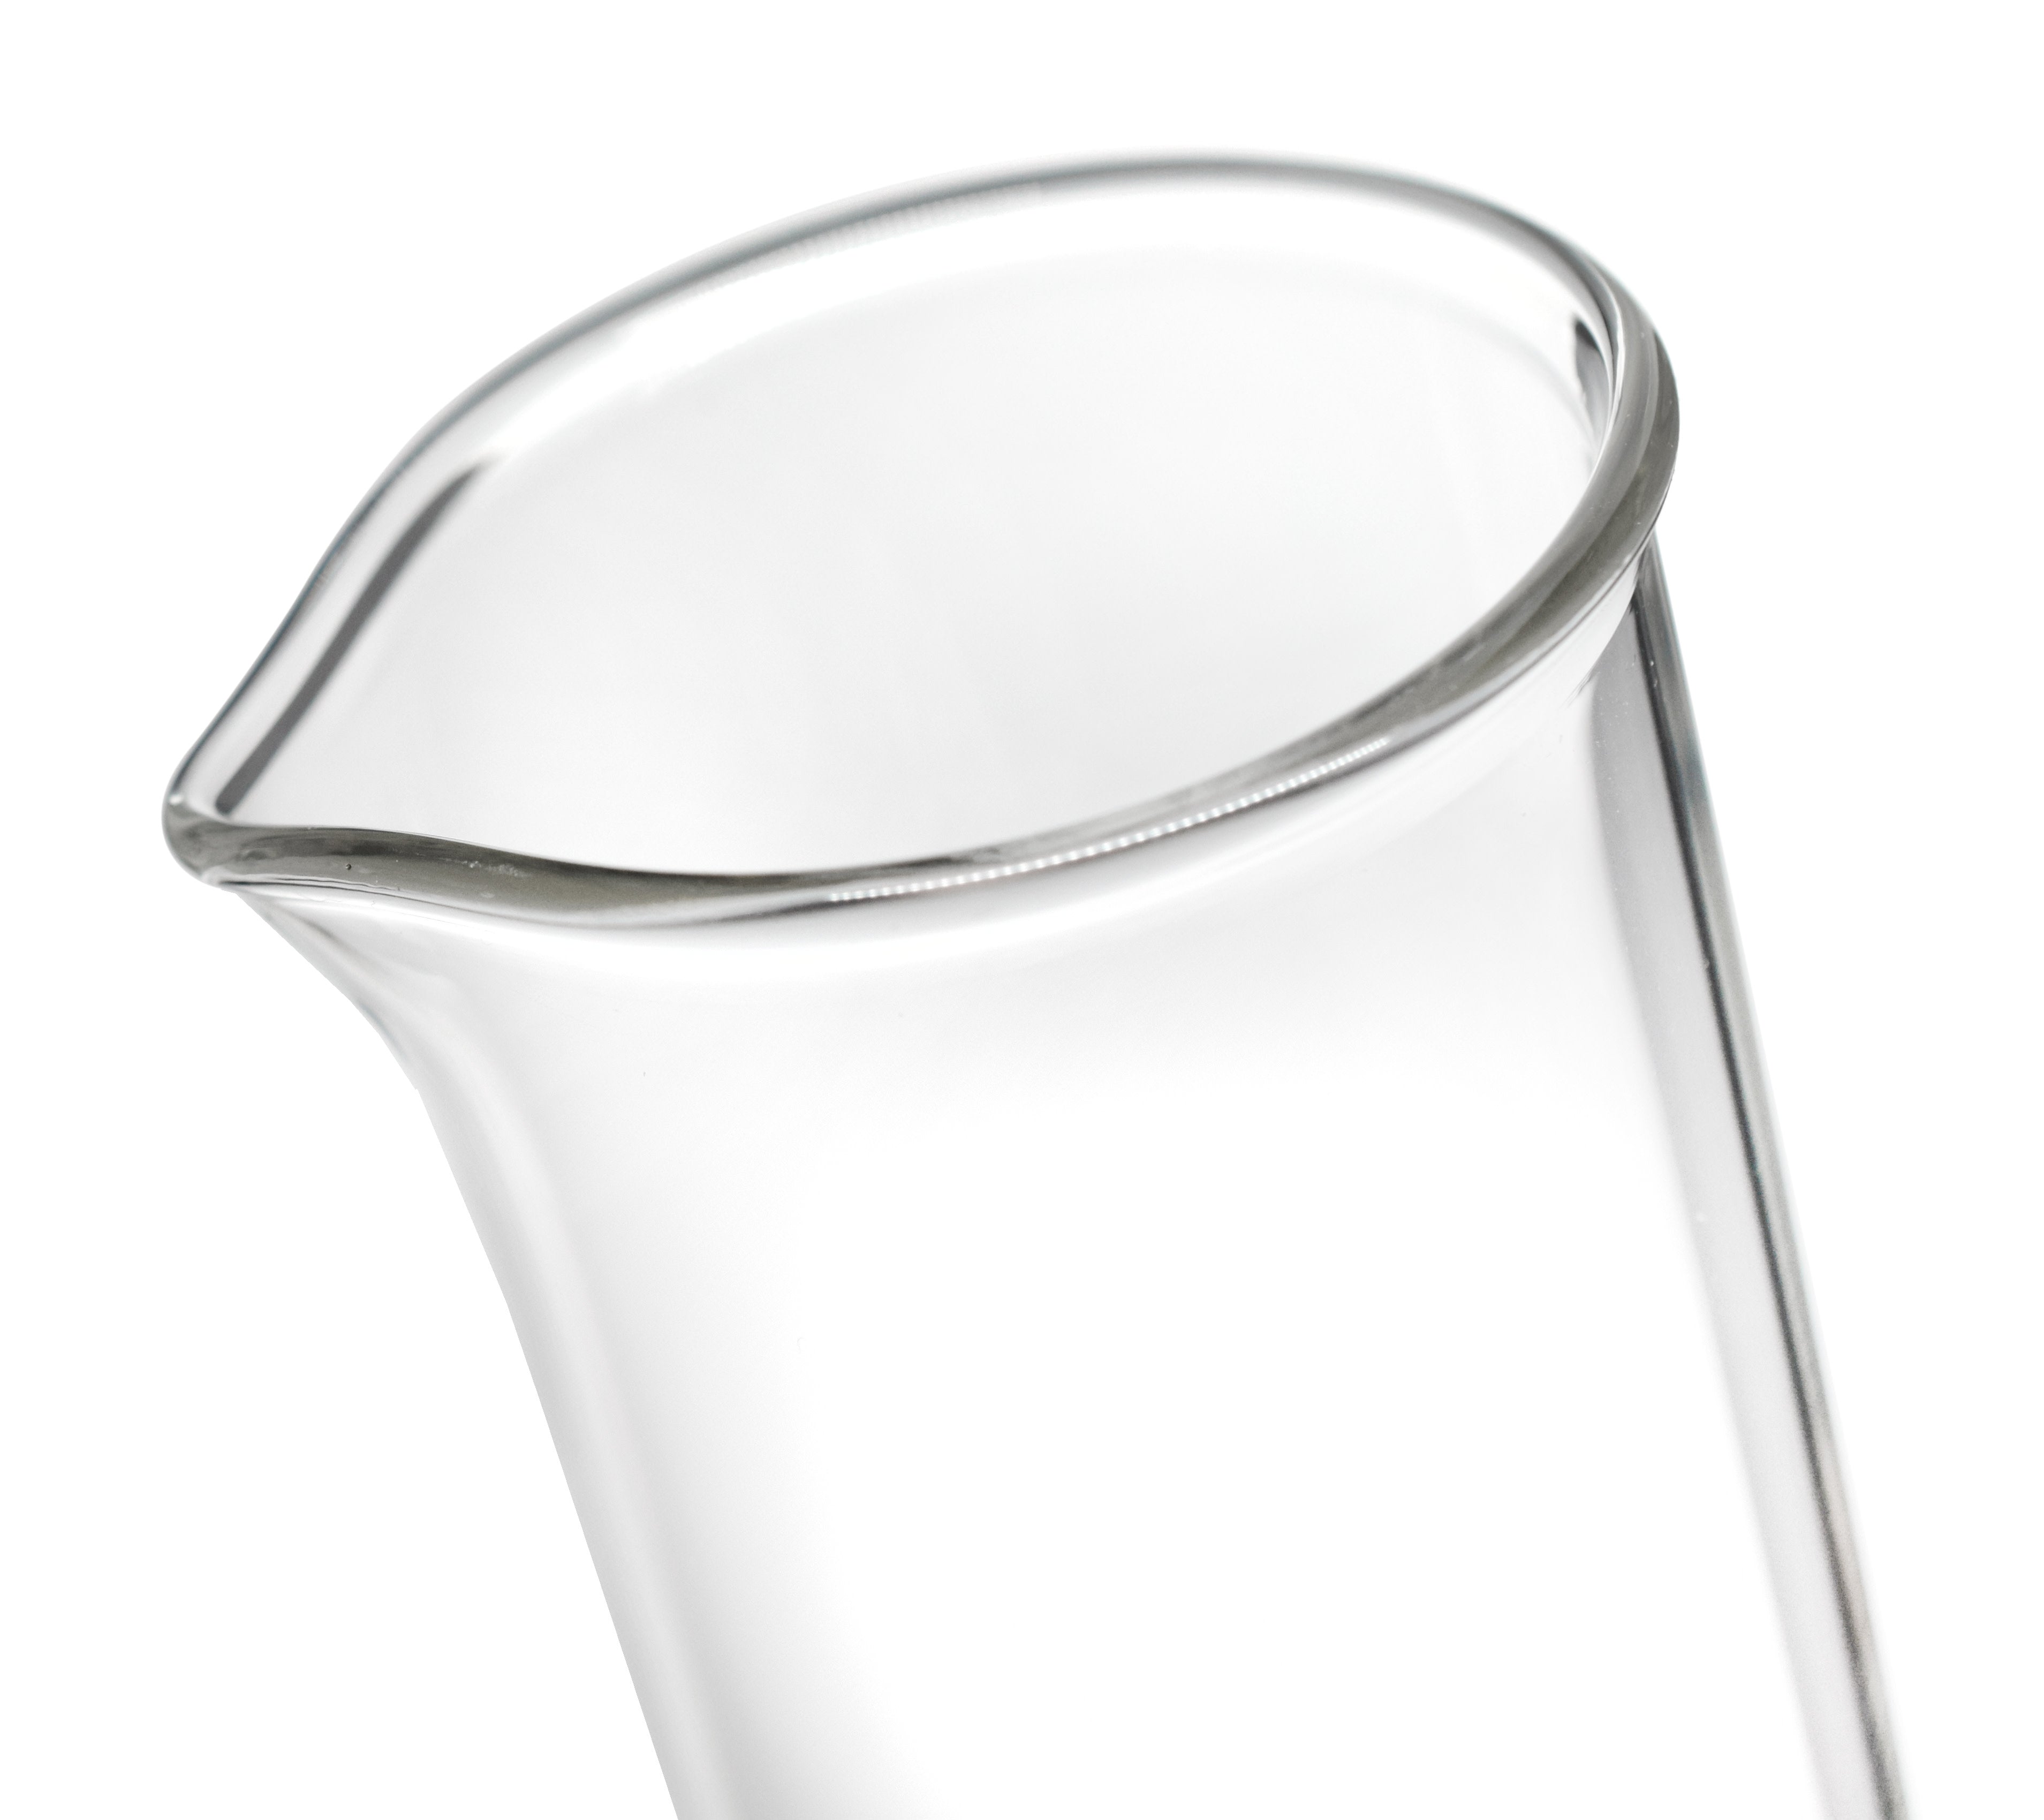 Borosilicate Glass Graduated Cylinder with Guard, 500 ml, 5.0 ml Graduation, Class A, ASTM, Autoclavable